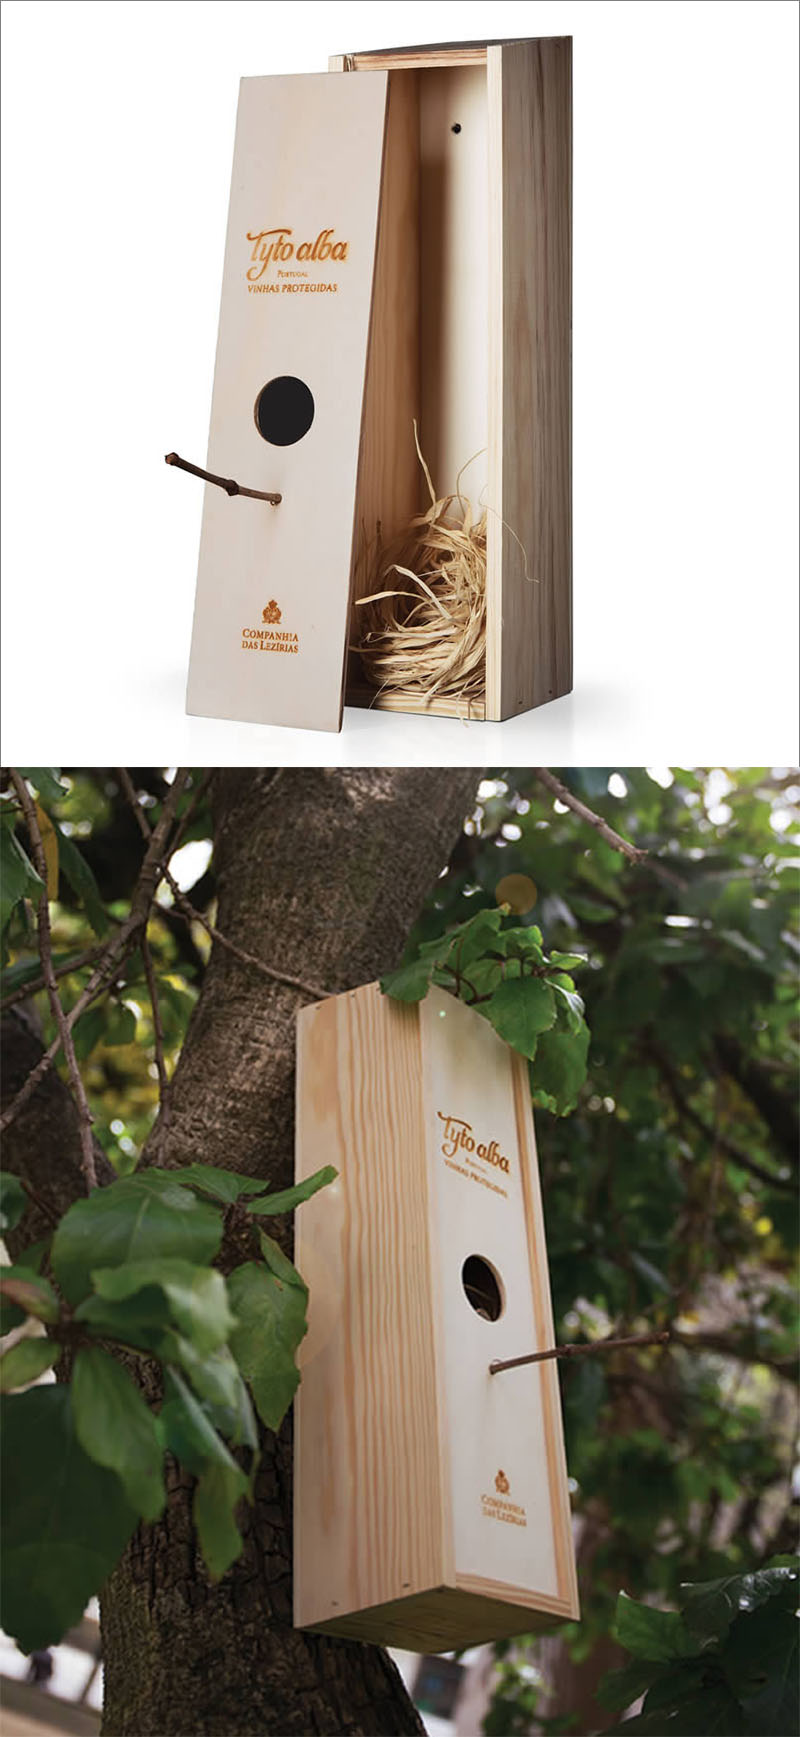 This modern wine bottle packaging features a wooden box, that once the wine is finished, can be transformed into a birdhouse.